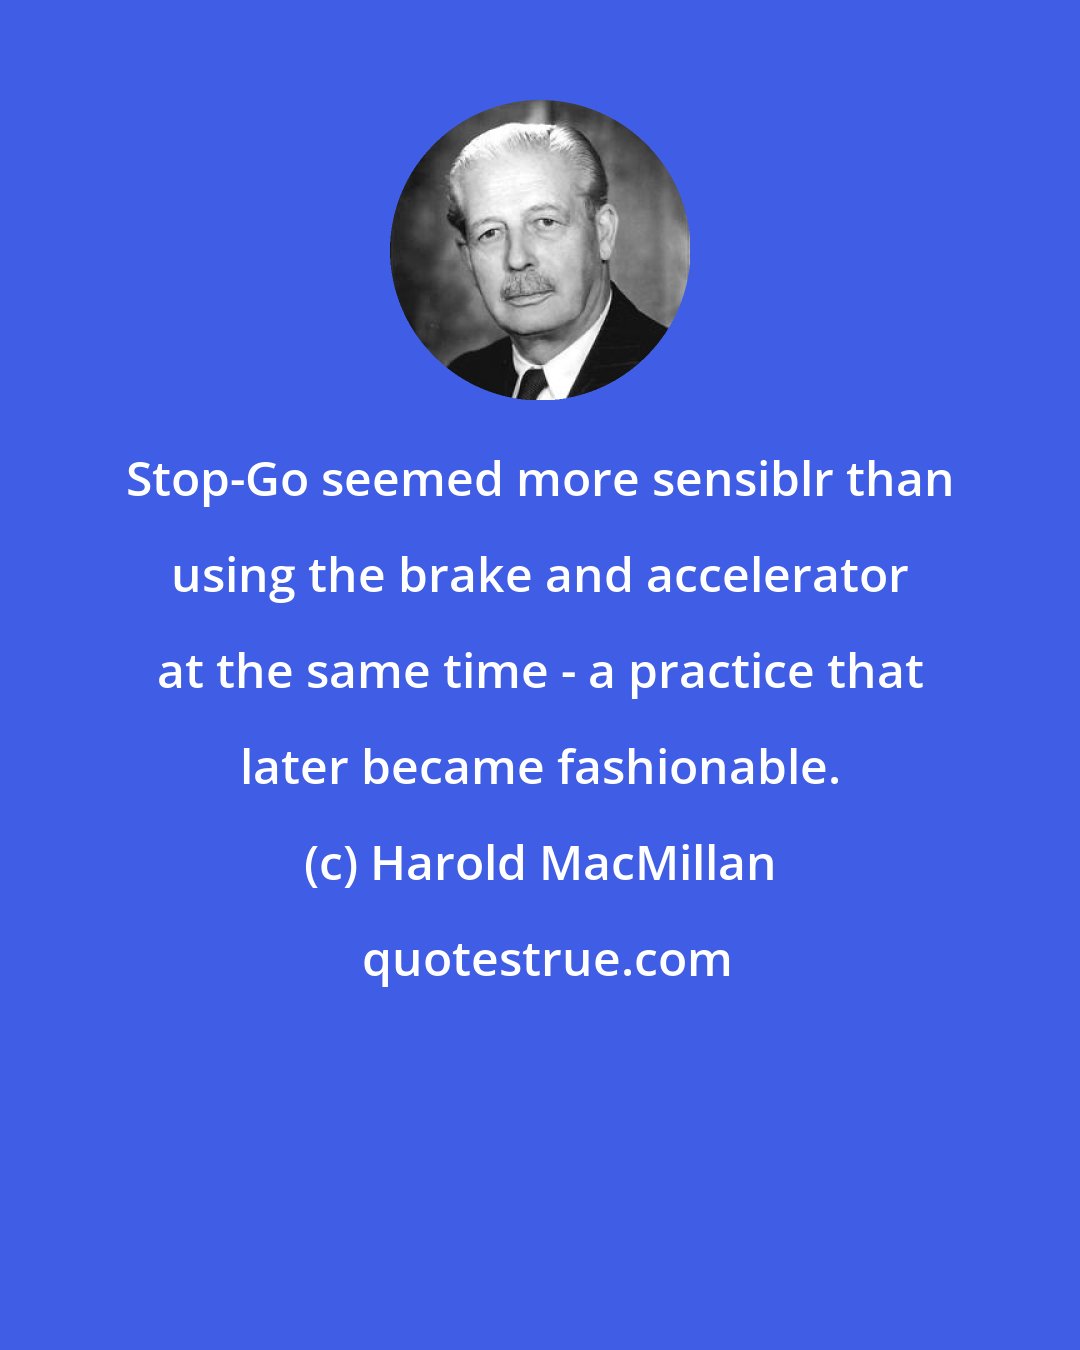 Harold MacMillan: Stop-Go seemed more sensiblr than using the brake and accelerator at the same time - a practice that later became fashionable.